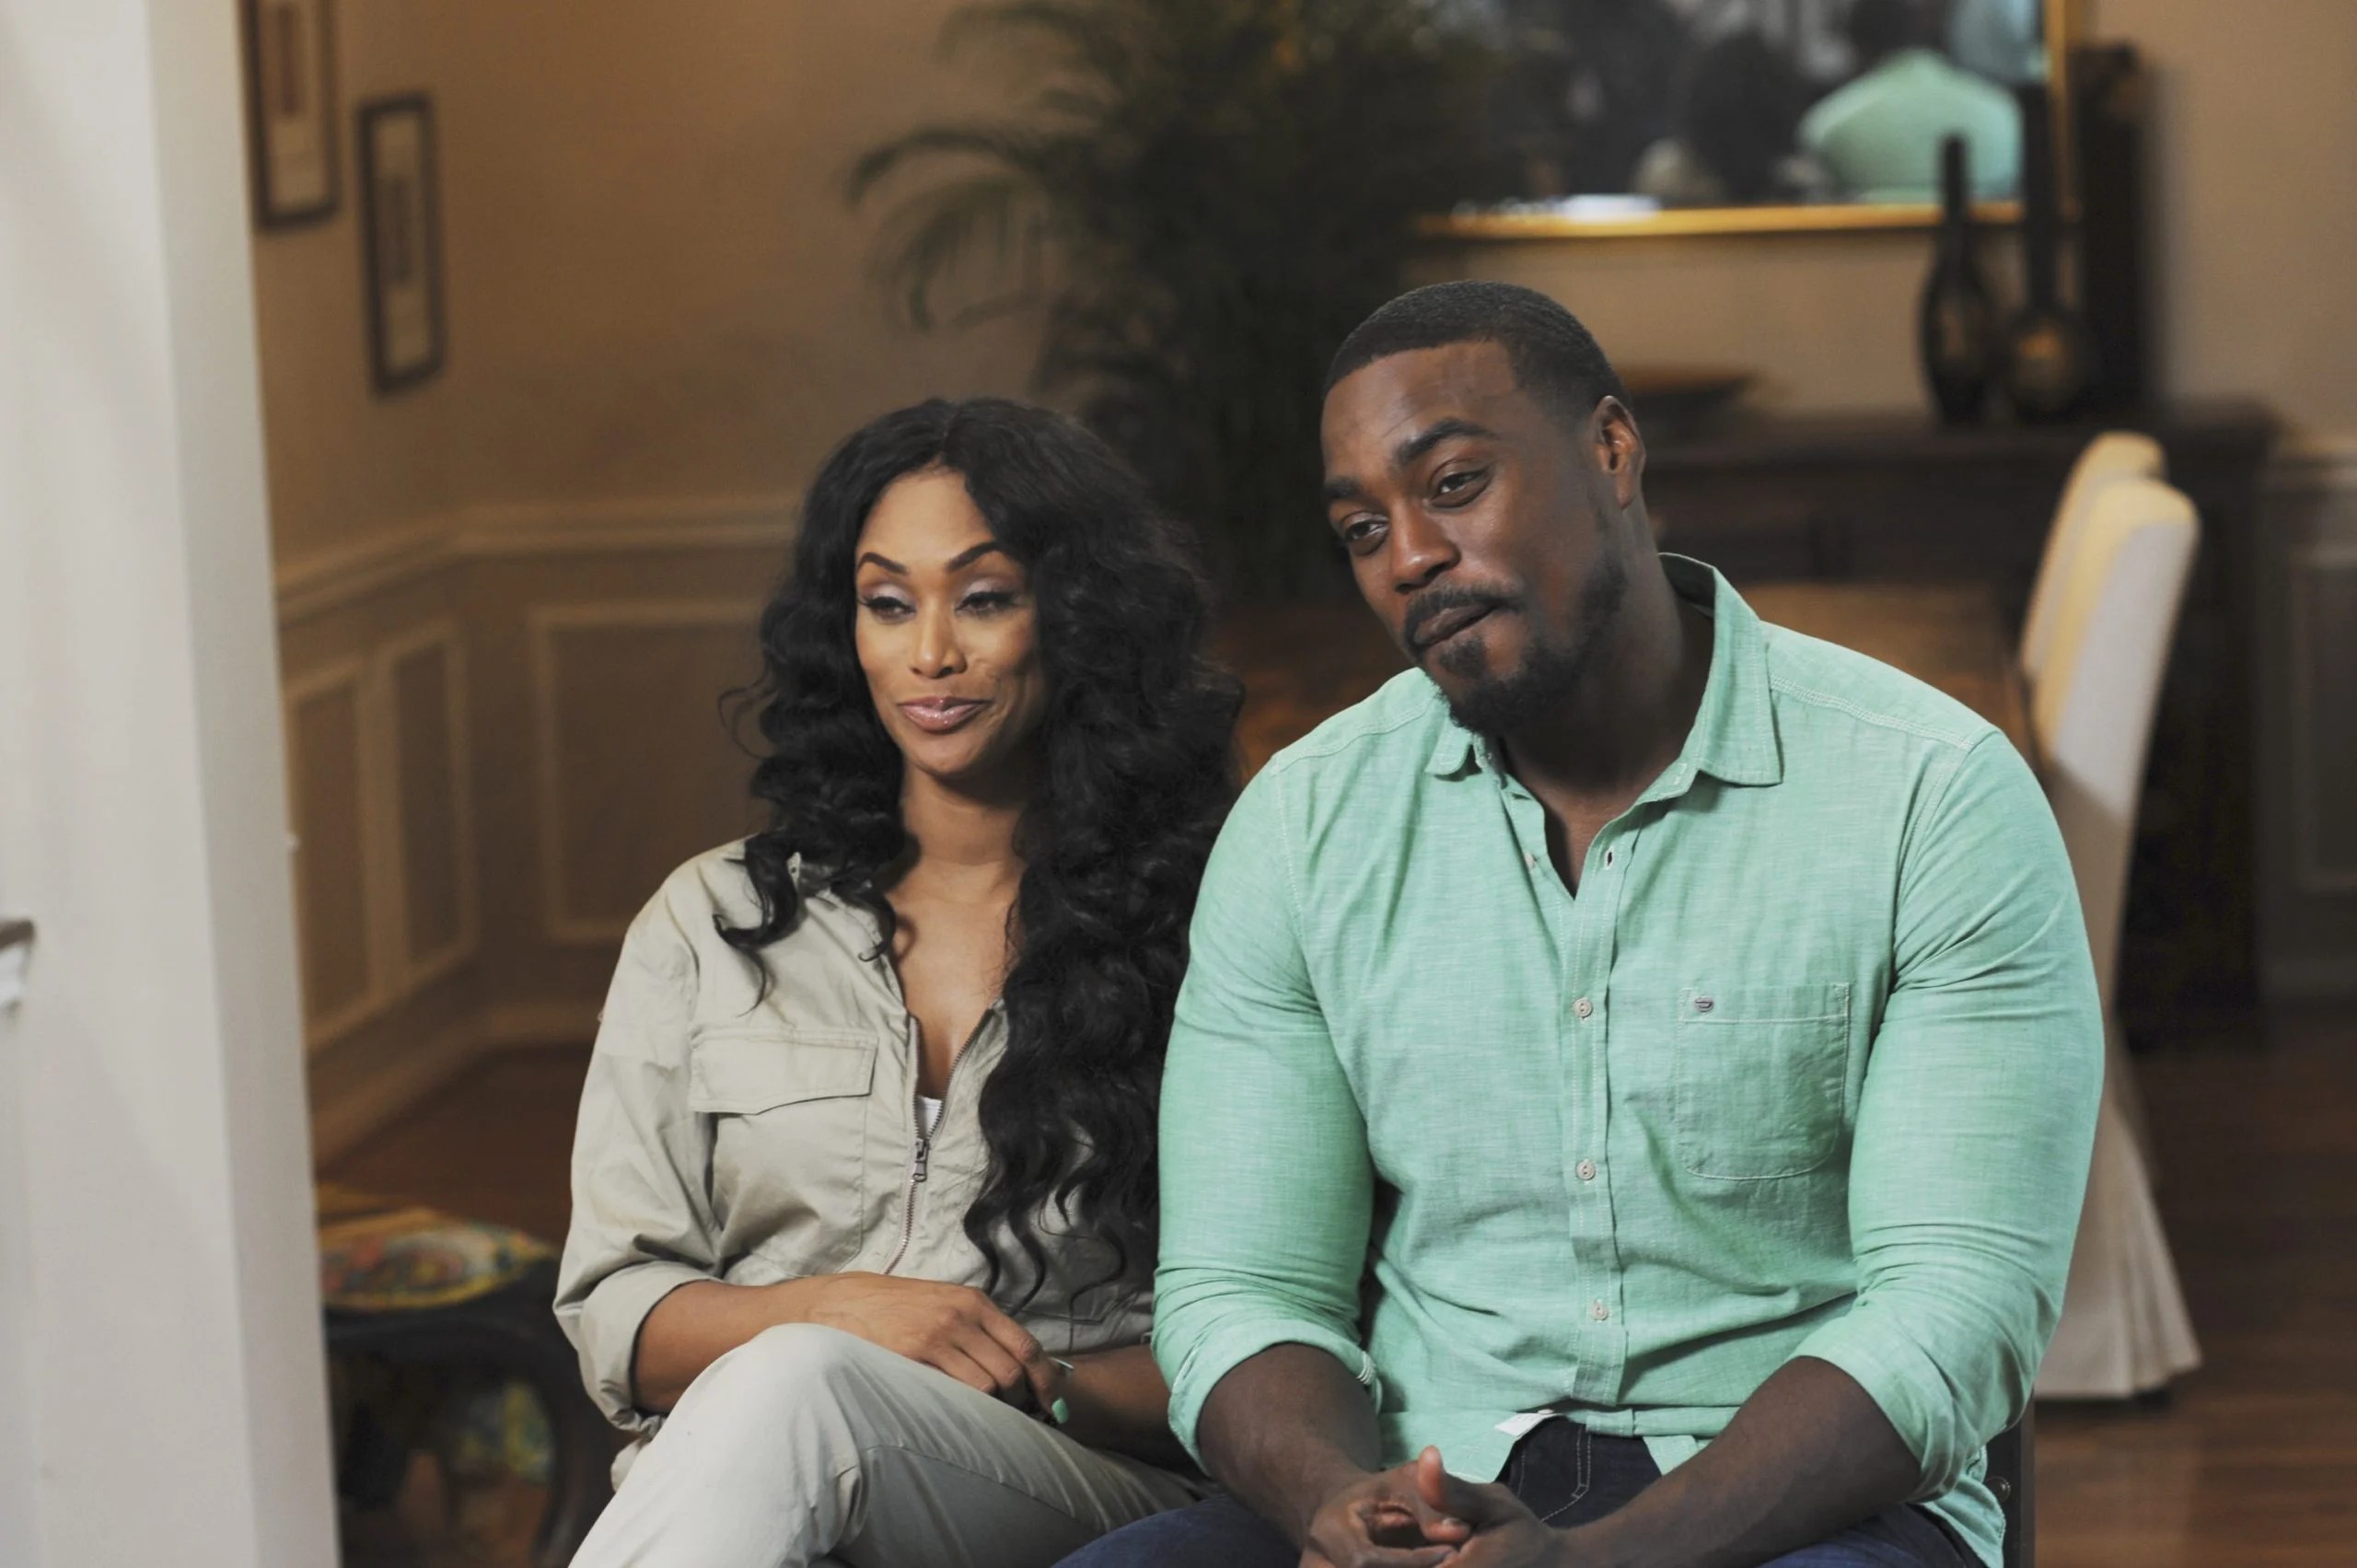 Tami Roman Explains Why She Is Fine With Her Husband Having A Child